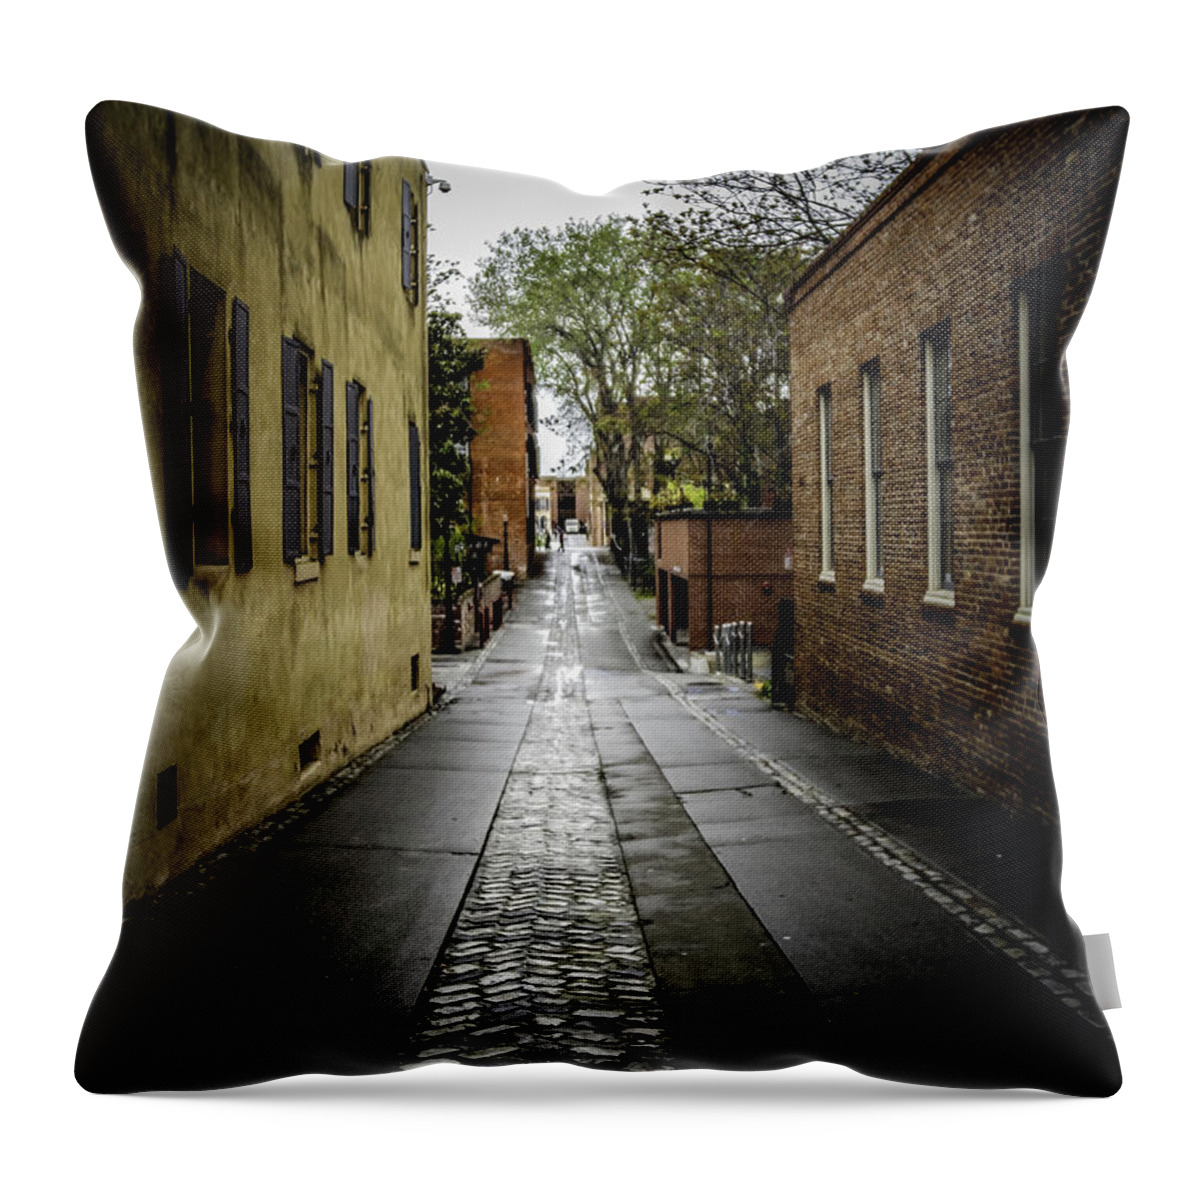 Back Alley Throw Pillow featuring the photograph Back Alley by Mitch Shindelbower